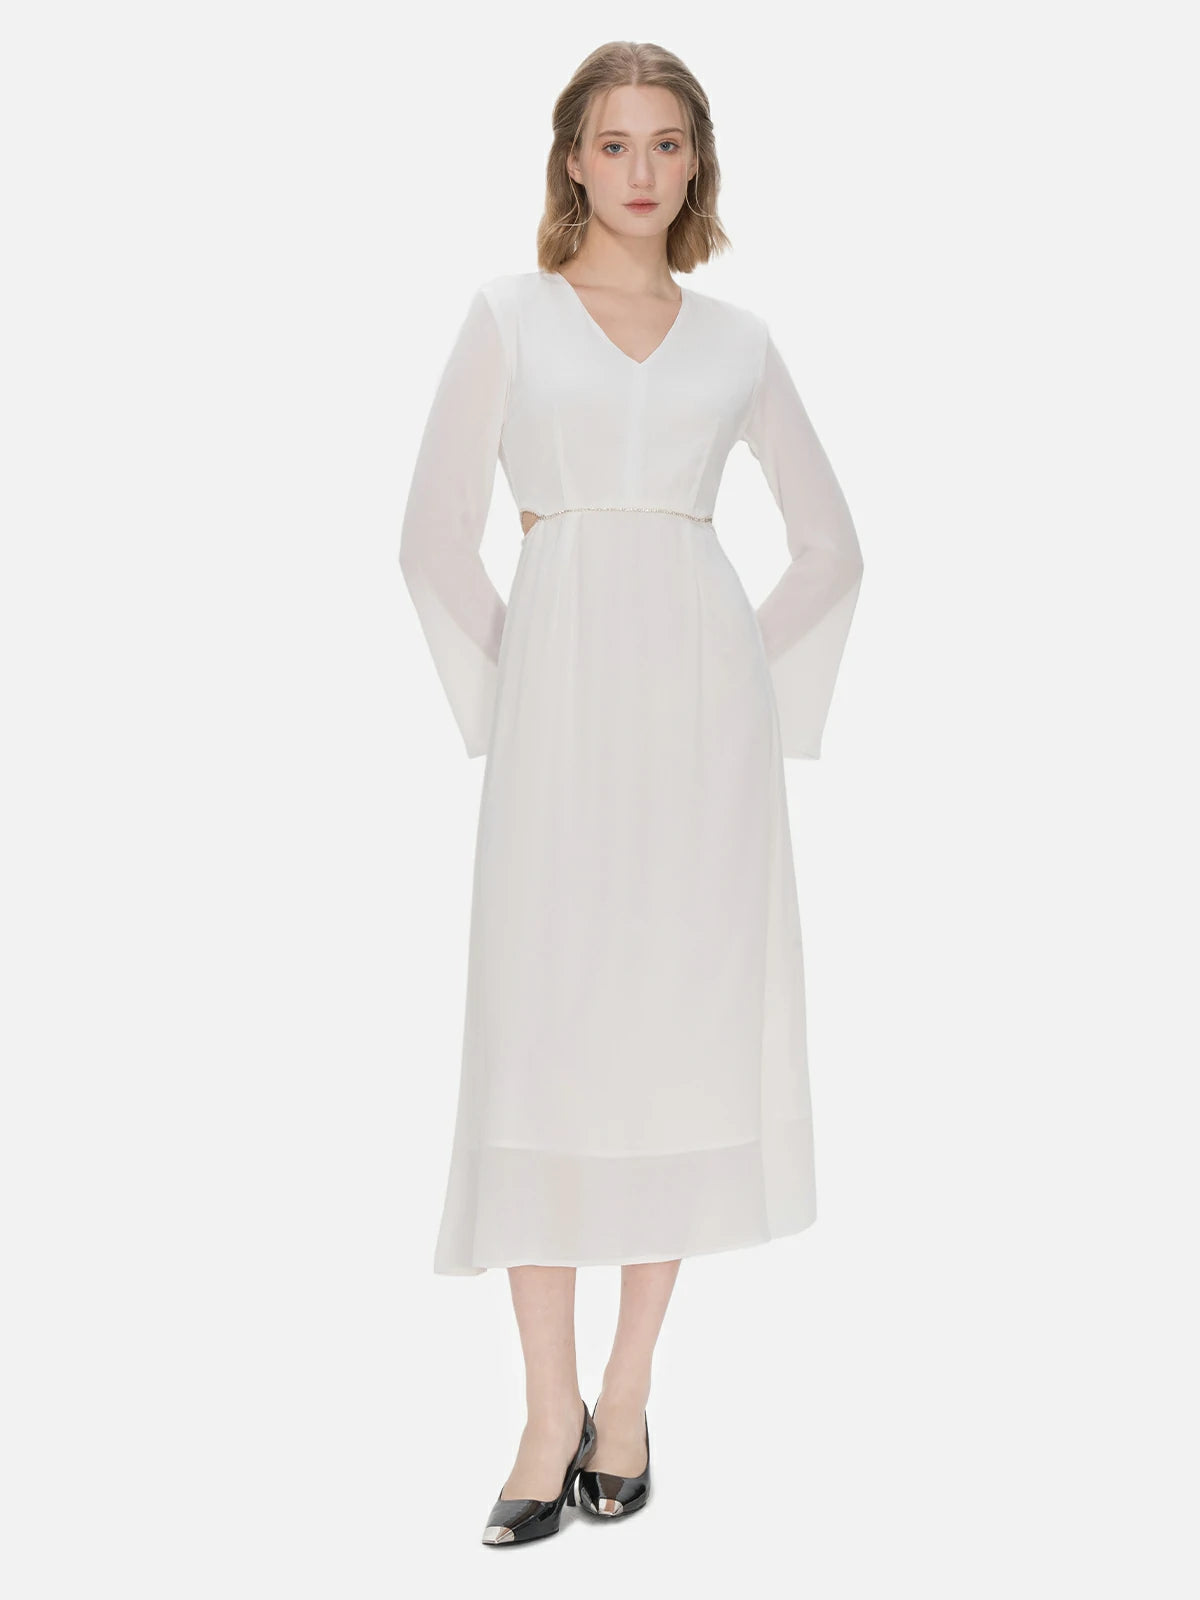 Make a statement with this elegant white chiffon dress, showcasing a V-neck, rhinestone details at the waist, and clever hollow-out accents, a perfect choice for those seeking a romantic and stylish look.